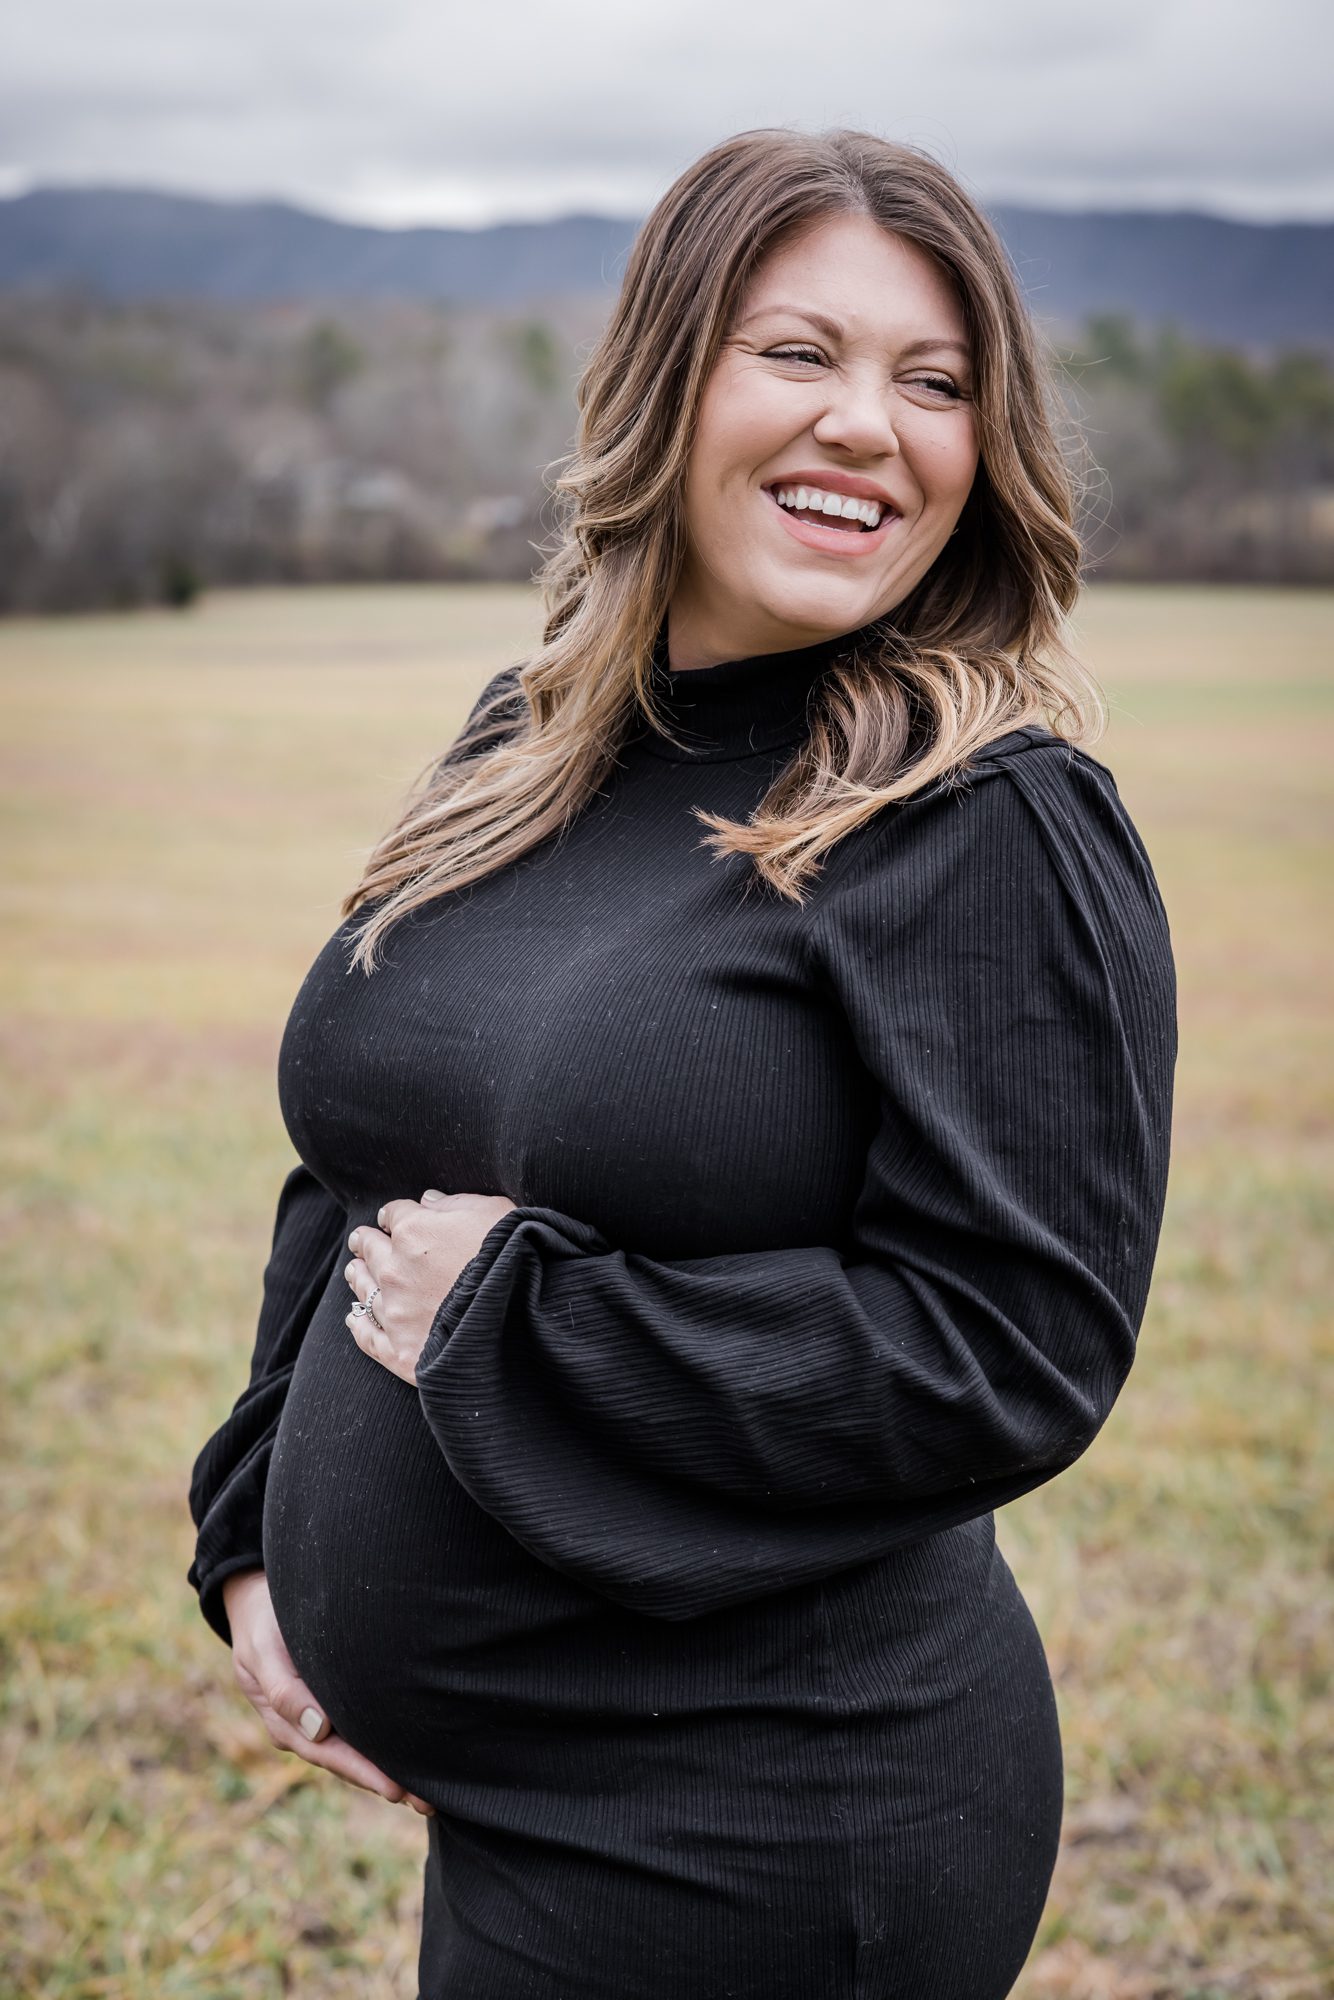 Winter Maternity Session